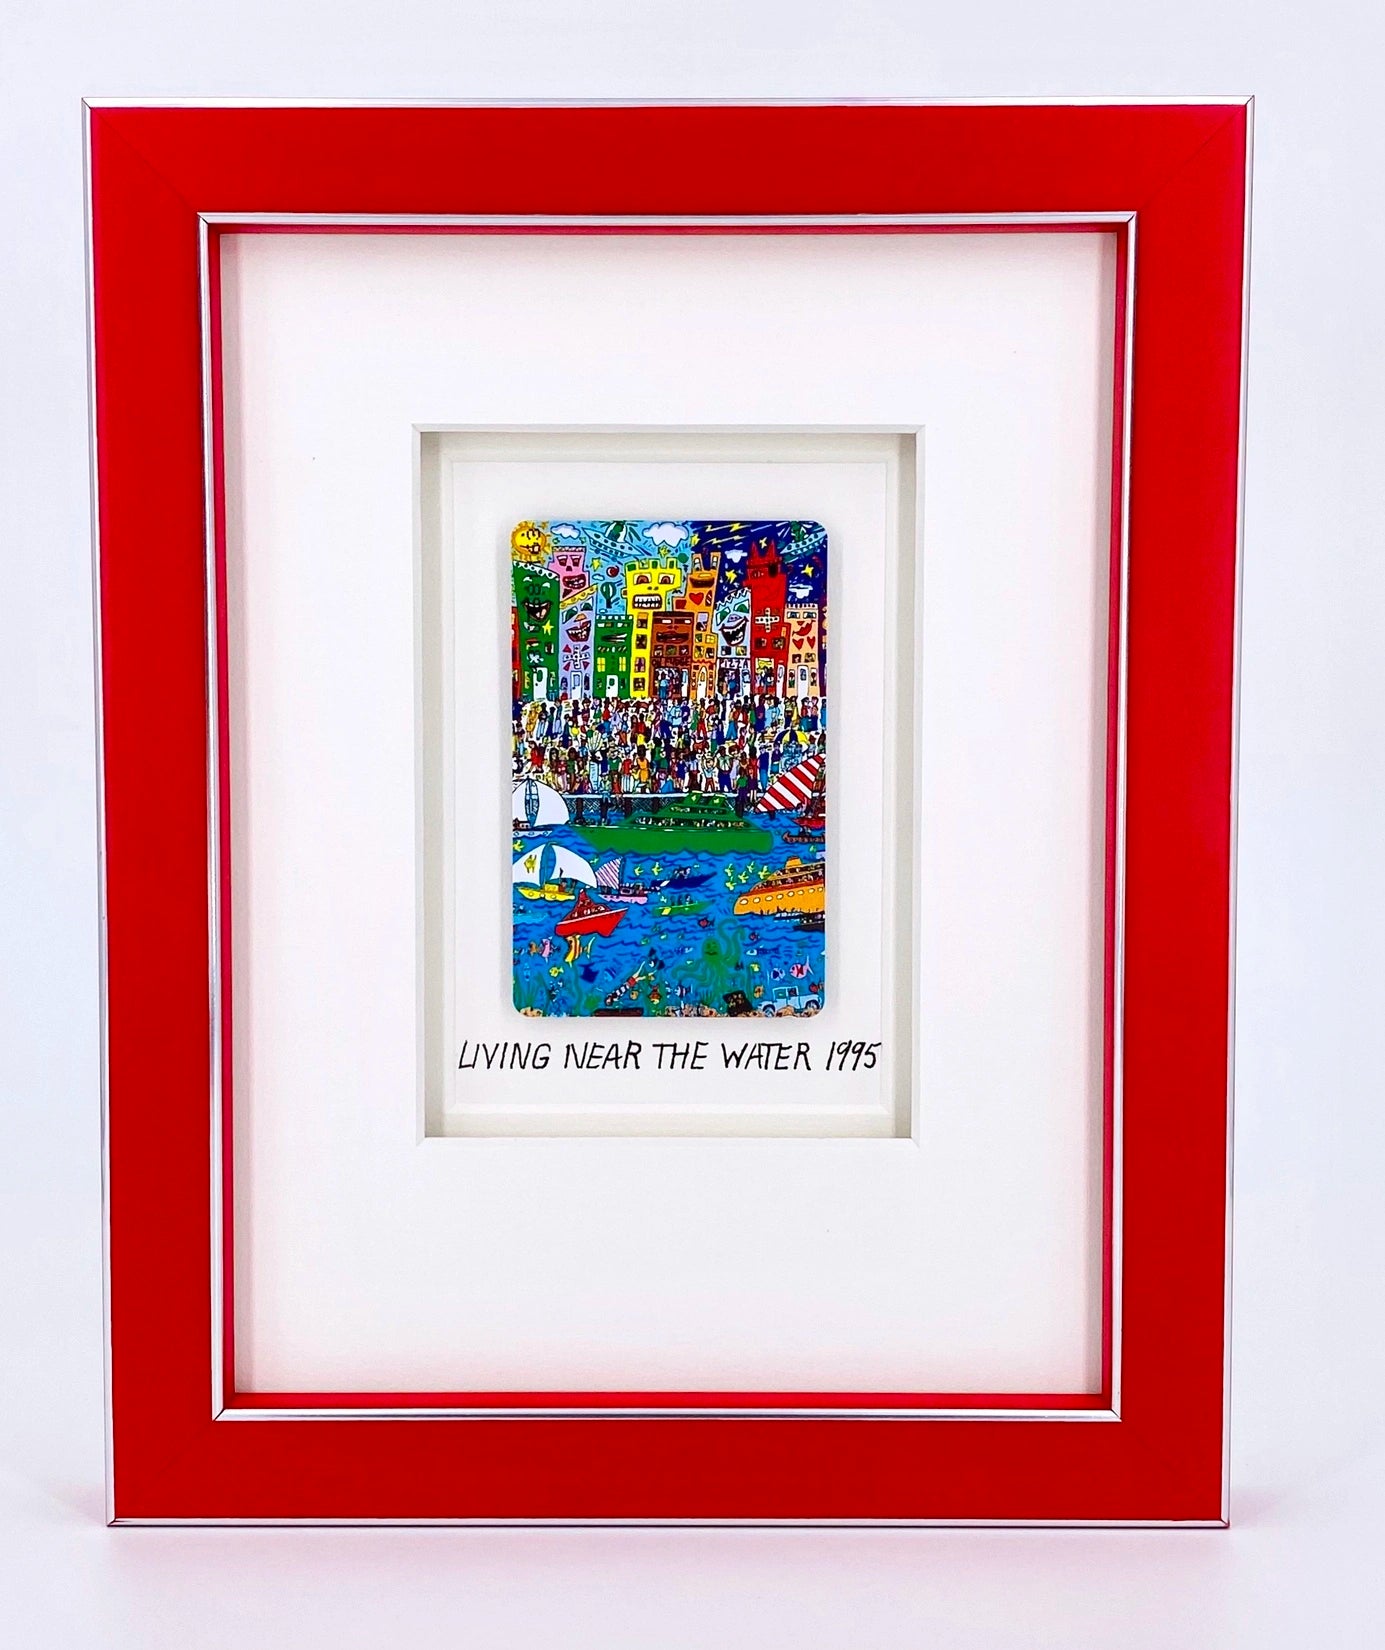 Original James Rizzi Living near the water framed with museum glass